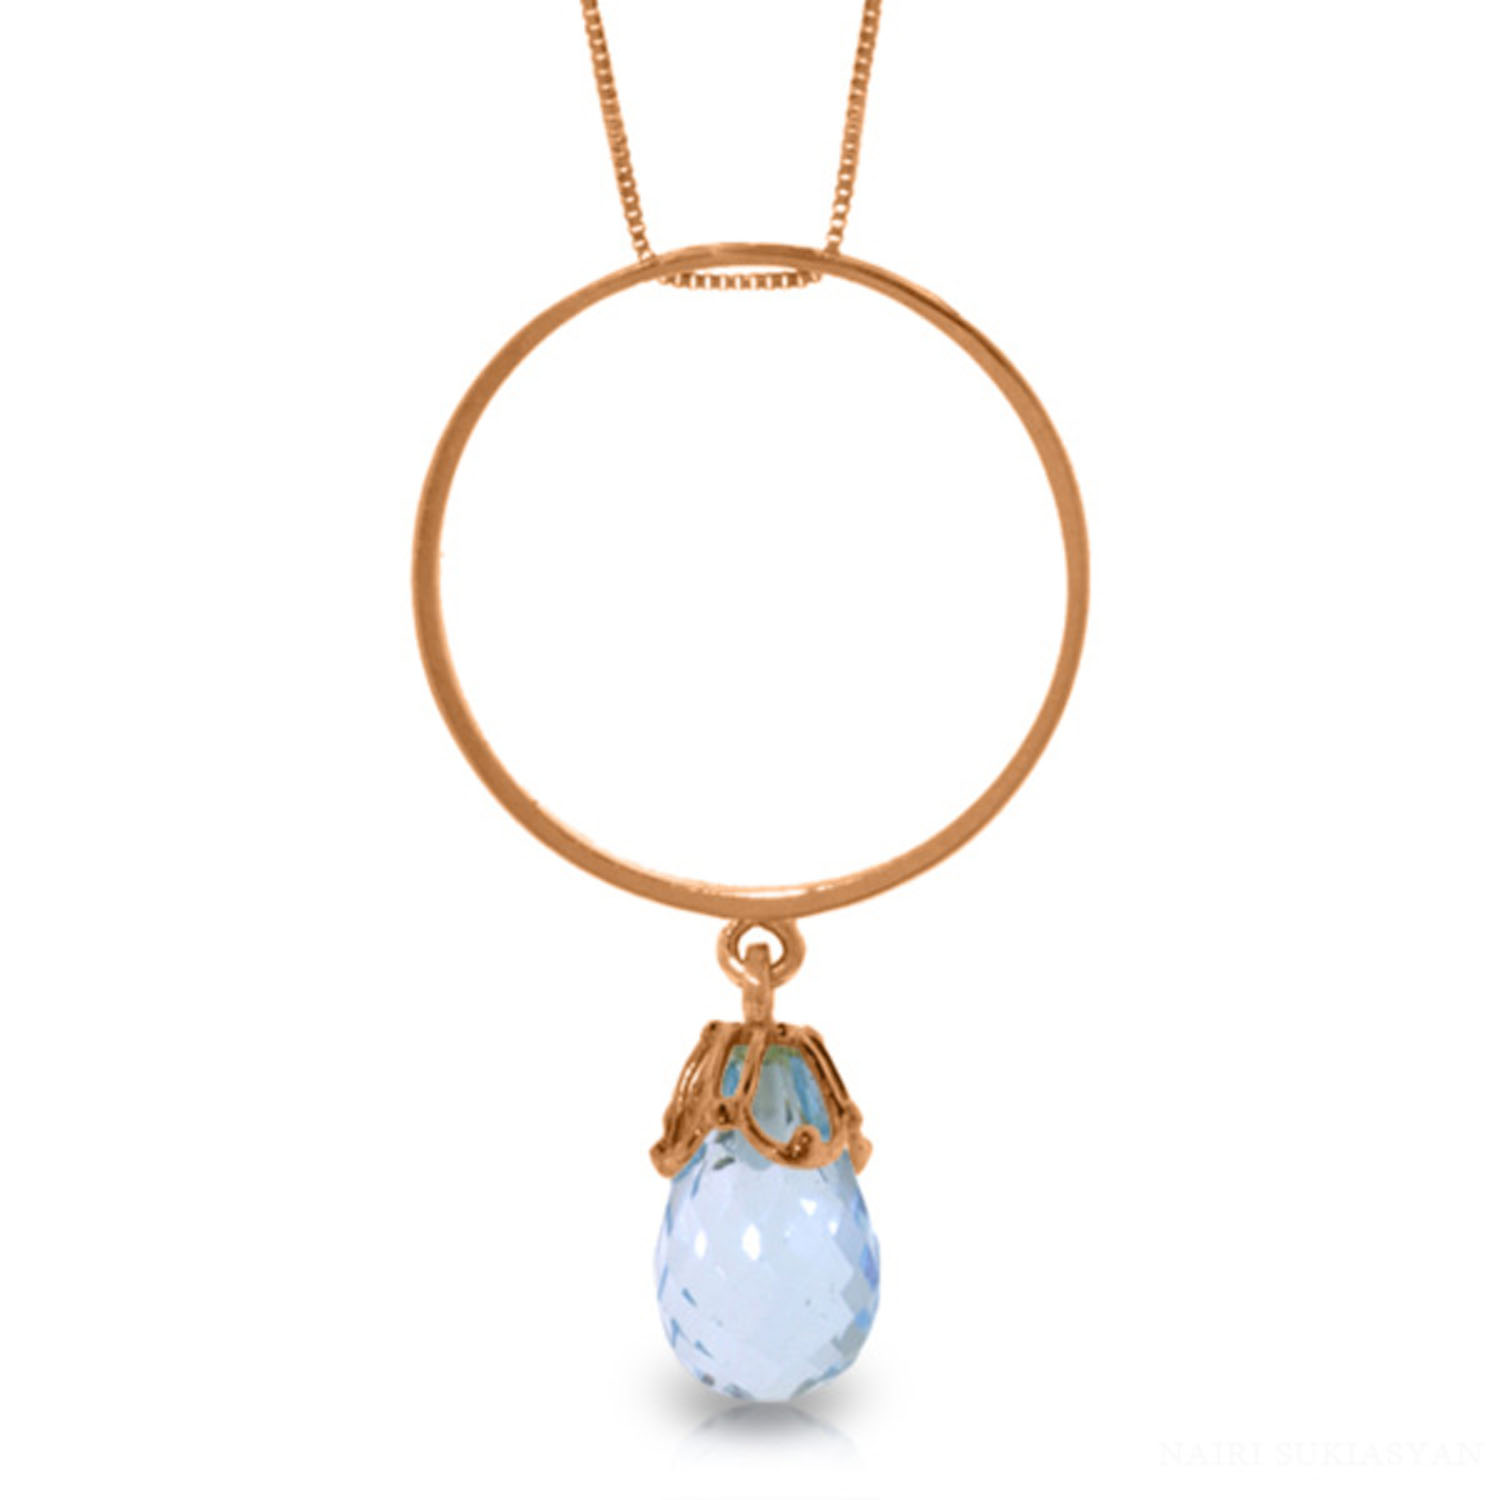 Galaxy Gold 3 Carat 14k 22" Solid Rose Gold Necklace with Natural Blue Topaz Charm Circle Pendant - image 1 of 2